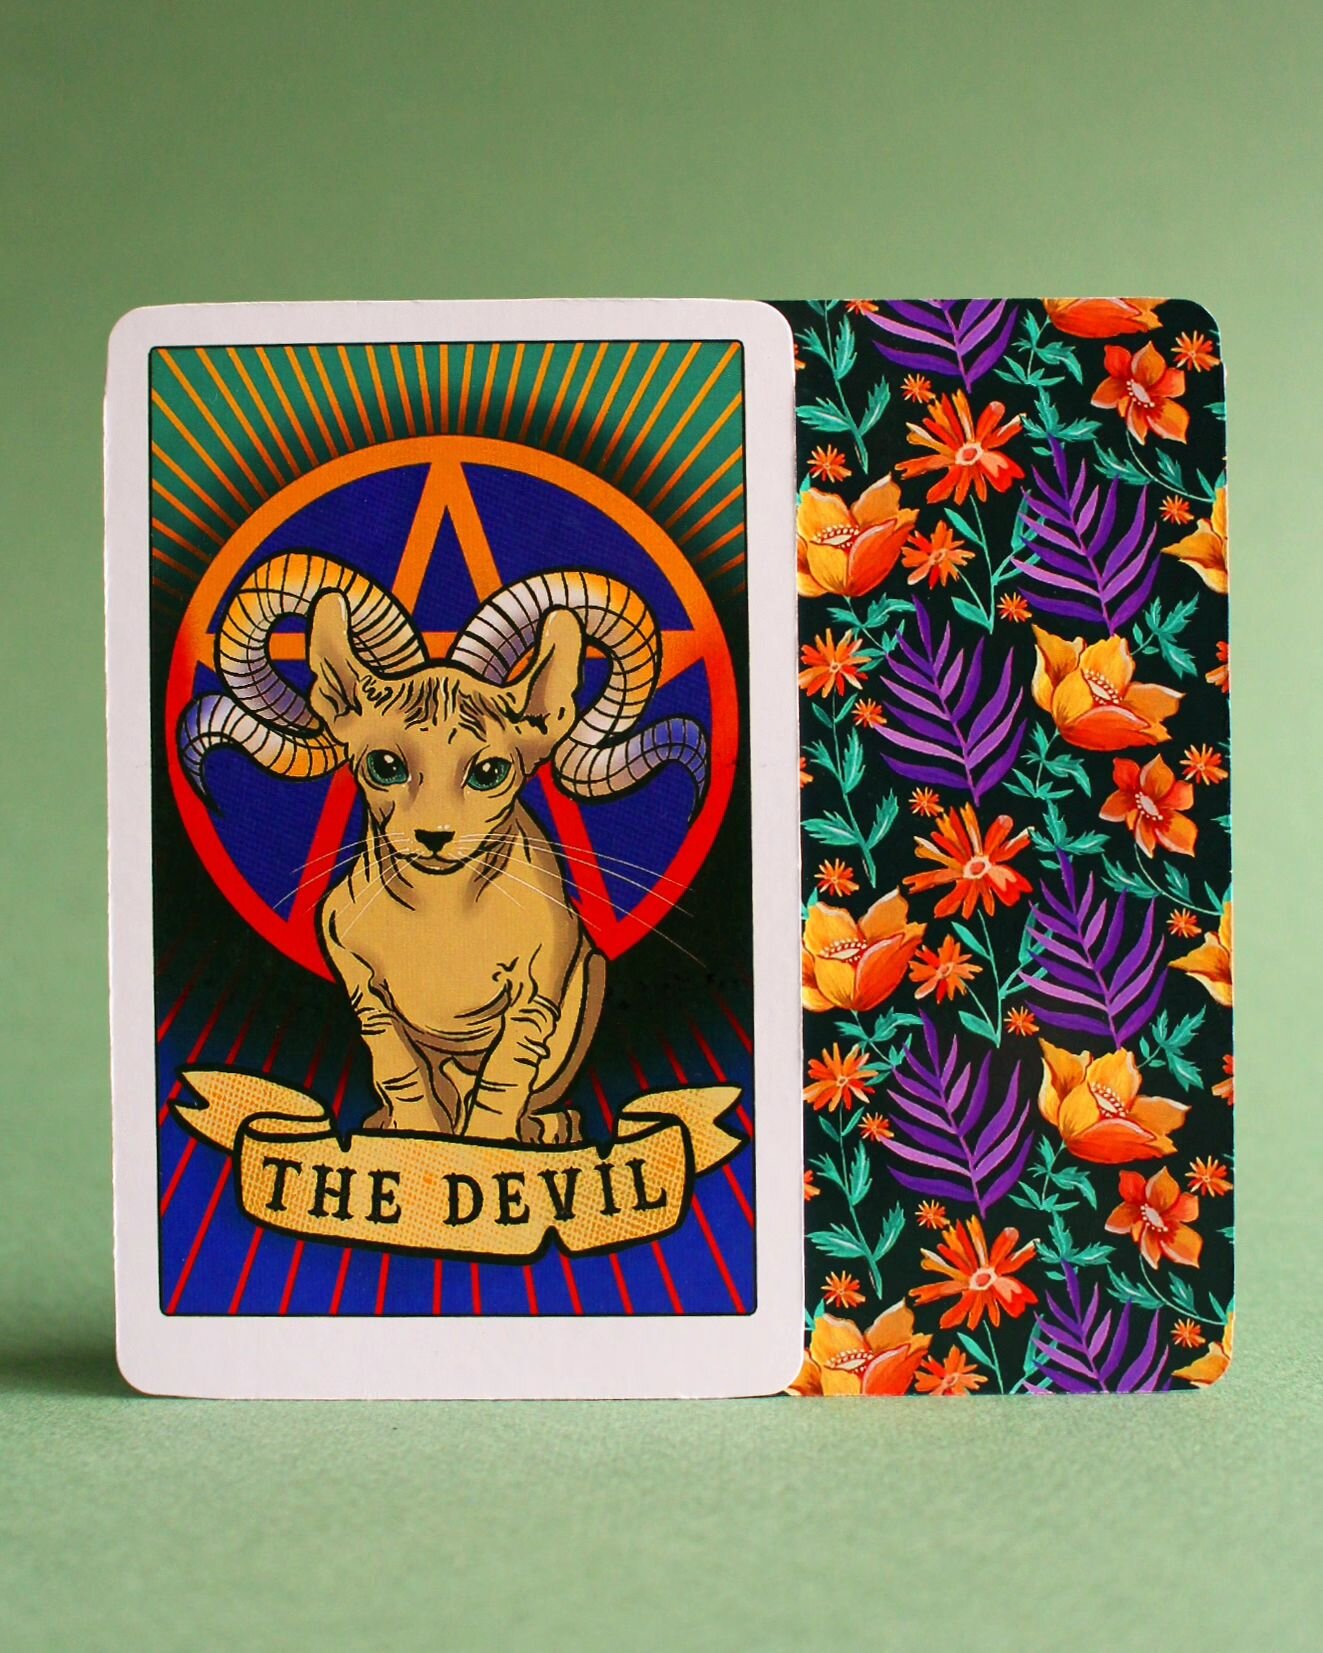 The tarot card for April was The Devil. Tarot cards are available exclusively on my patreon. Each month patrons receive a new card to complete their deck. New patrons receive all the cards up until the month they have pledged. This one is definitely 